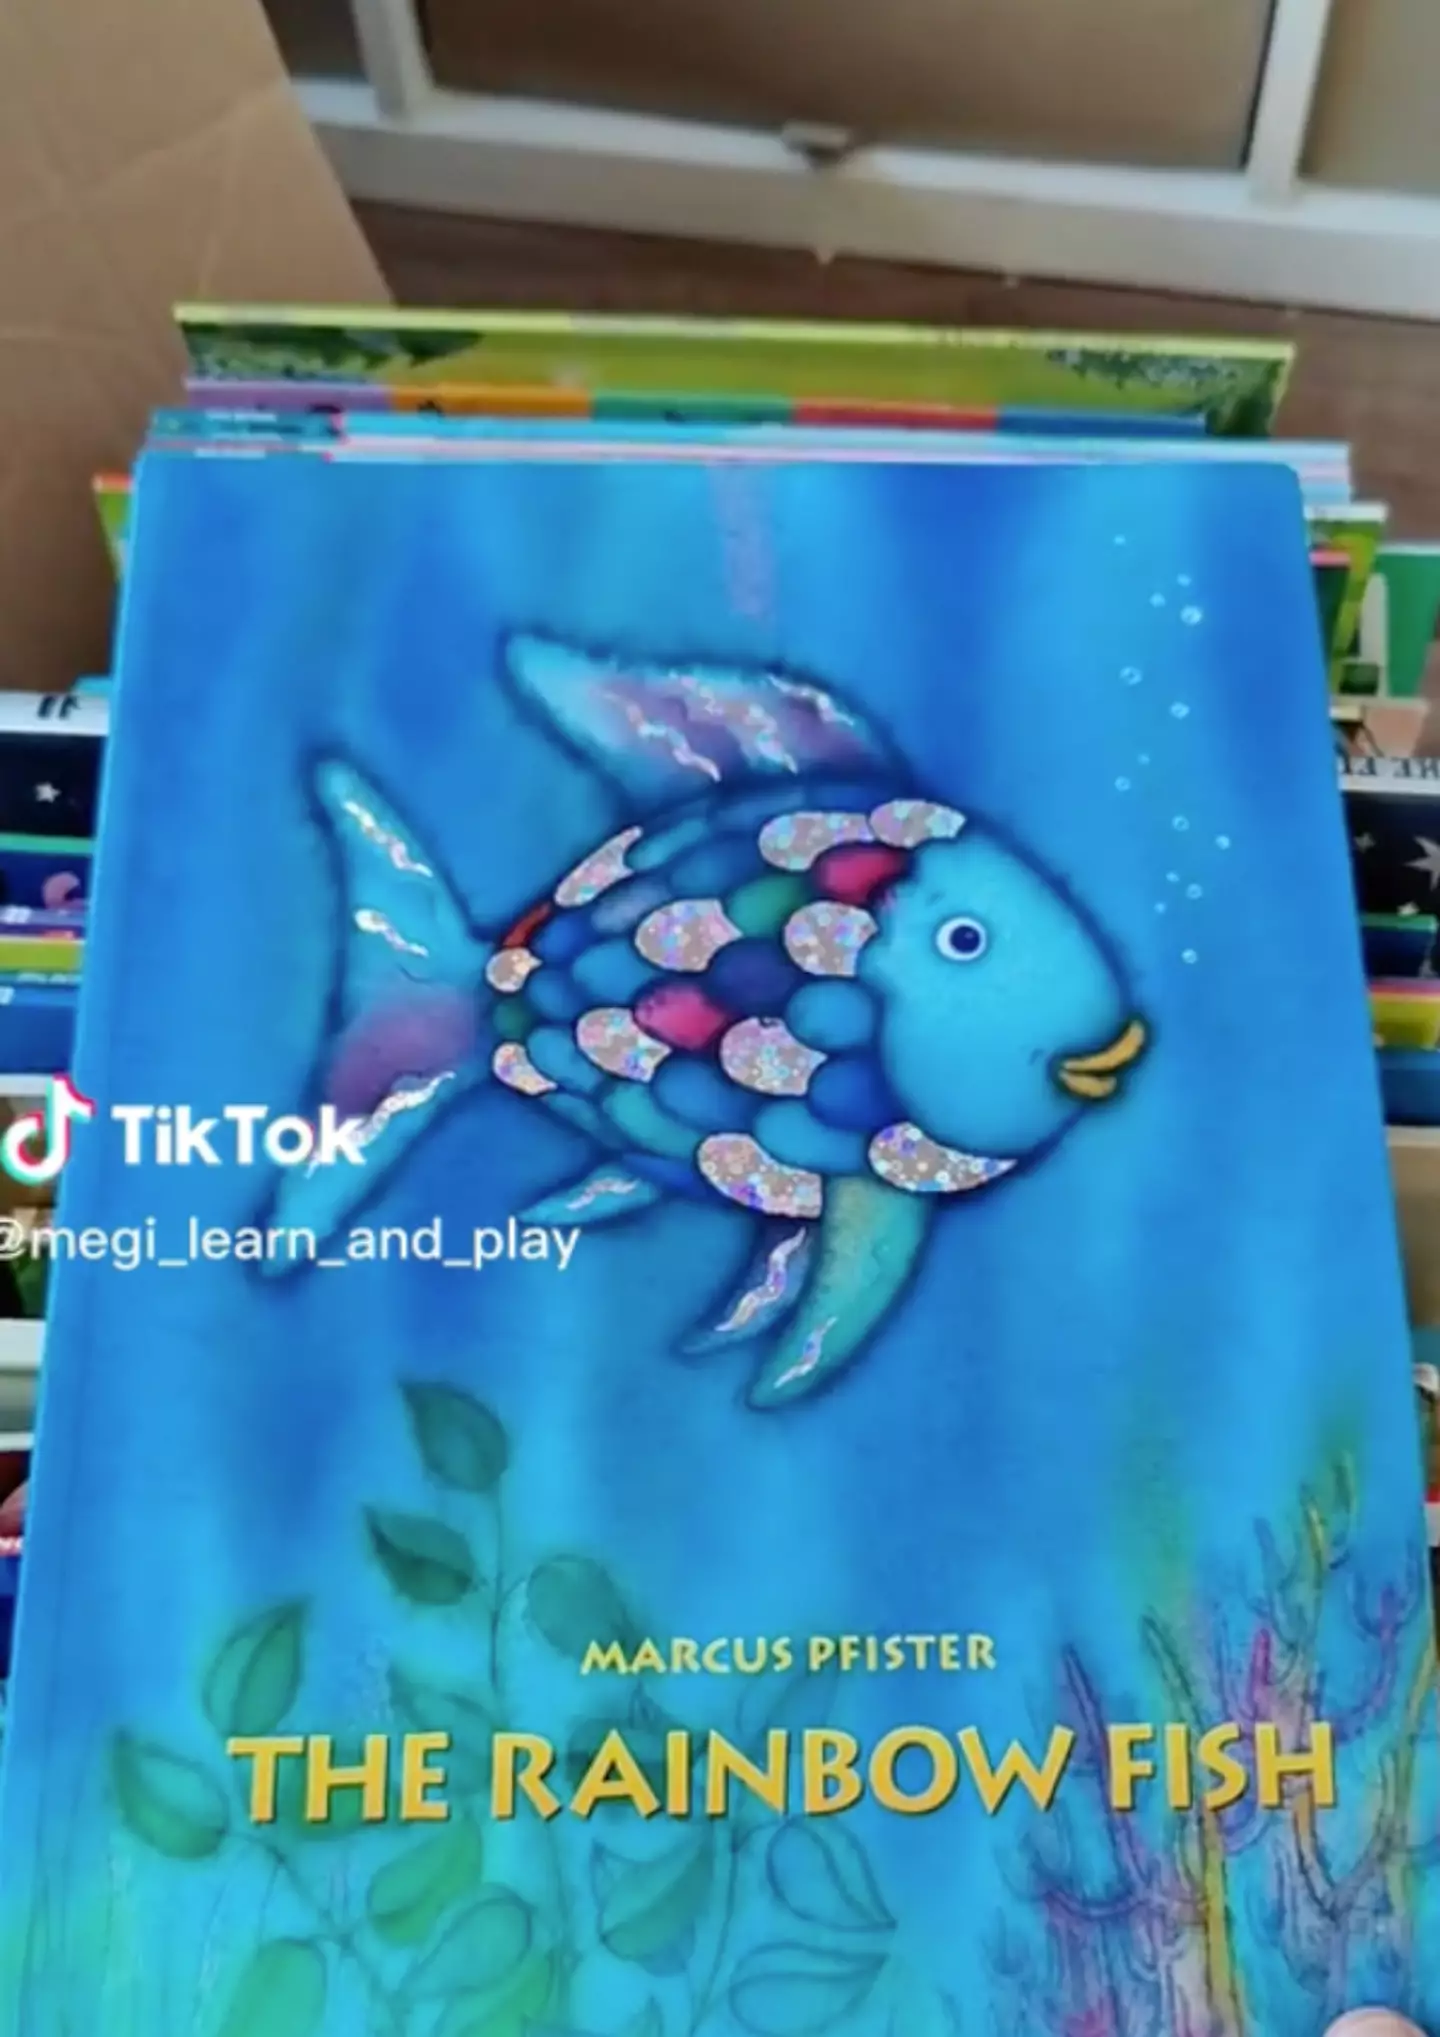 Apparently The Rainbow Fish doesn't have a good message.